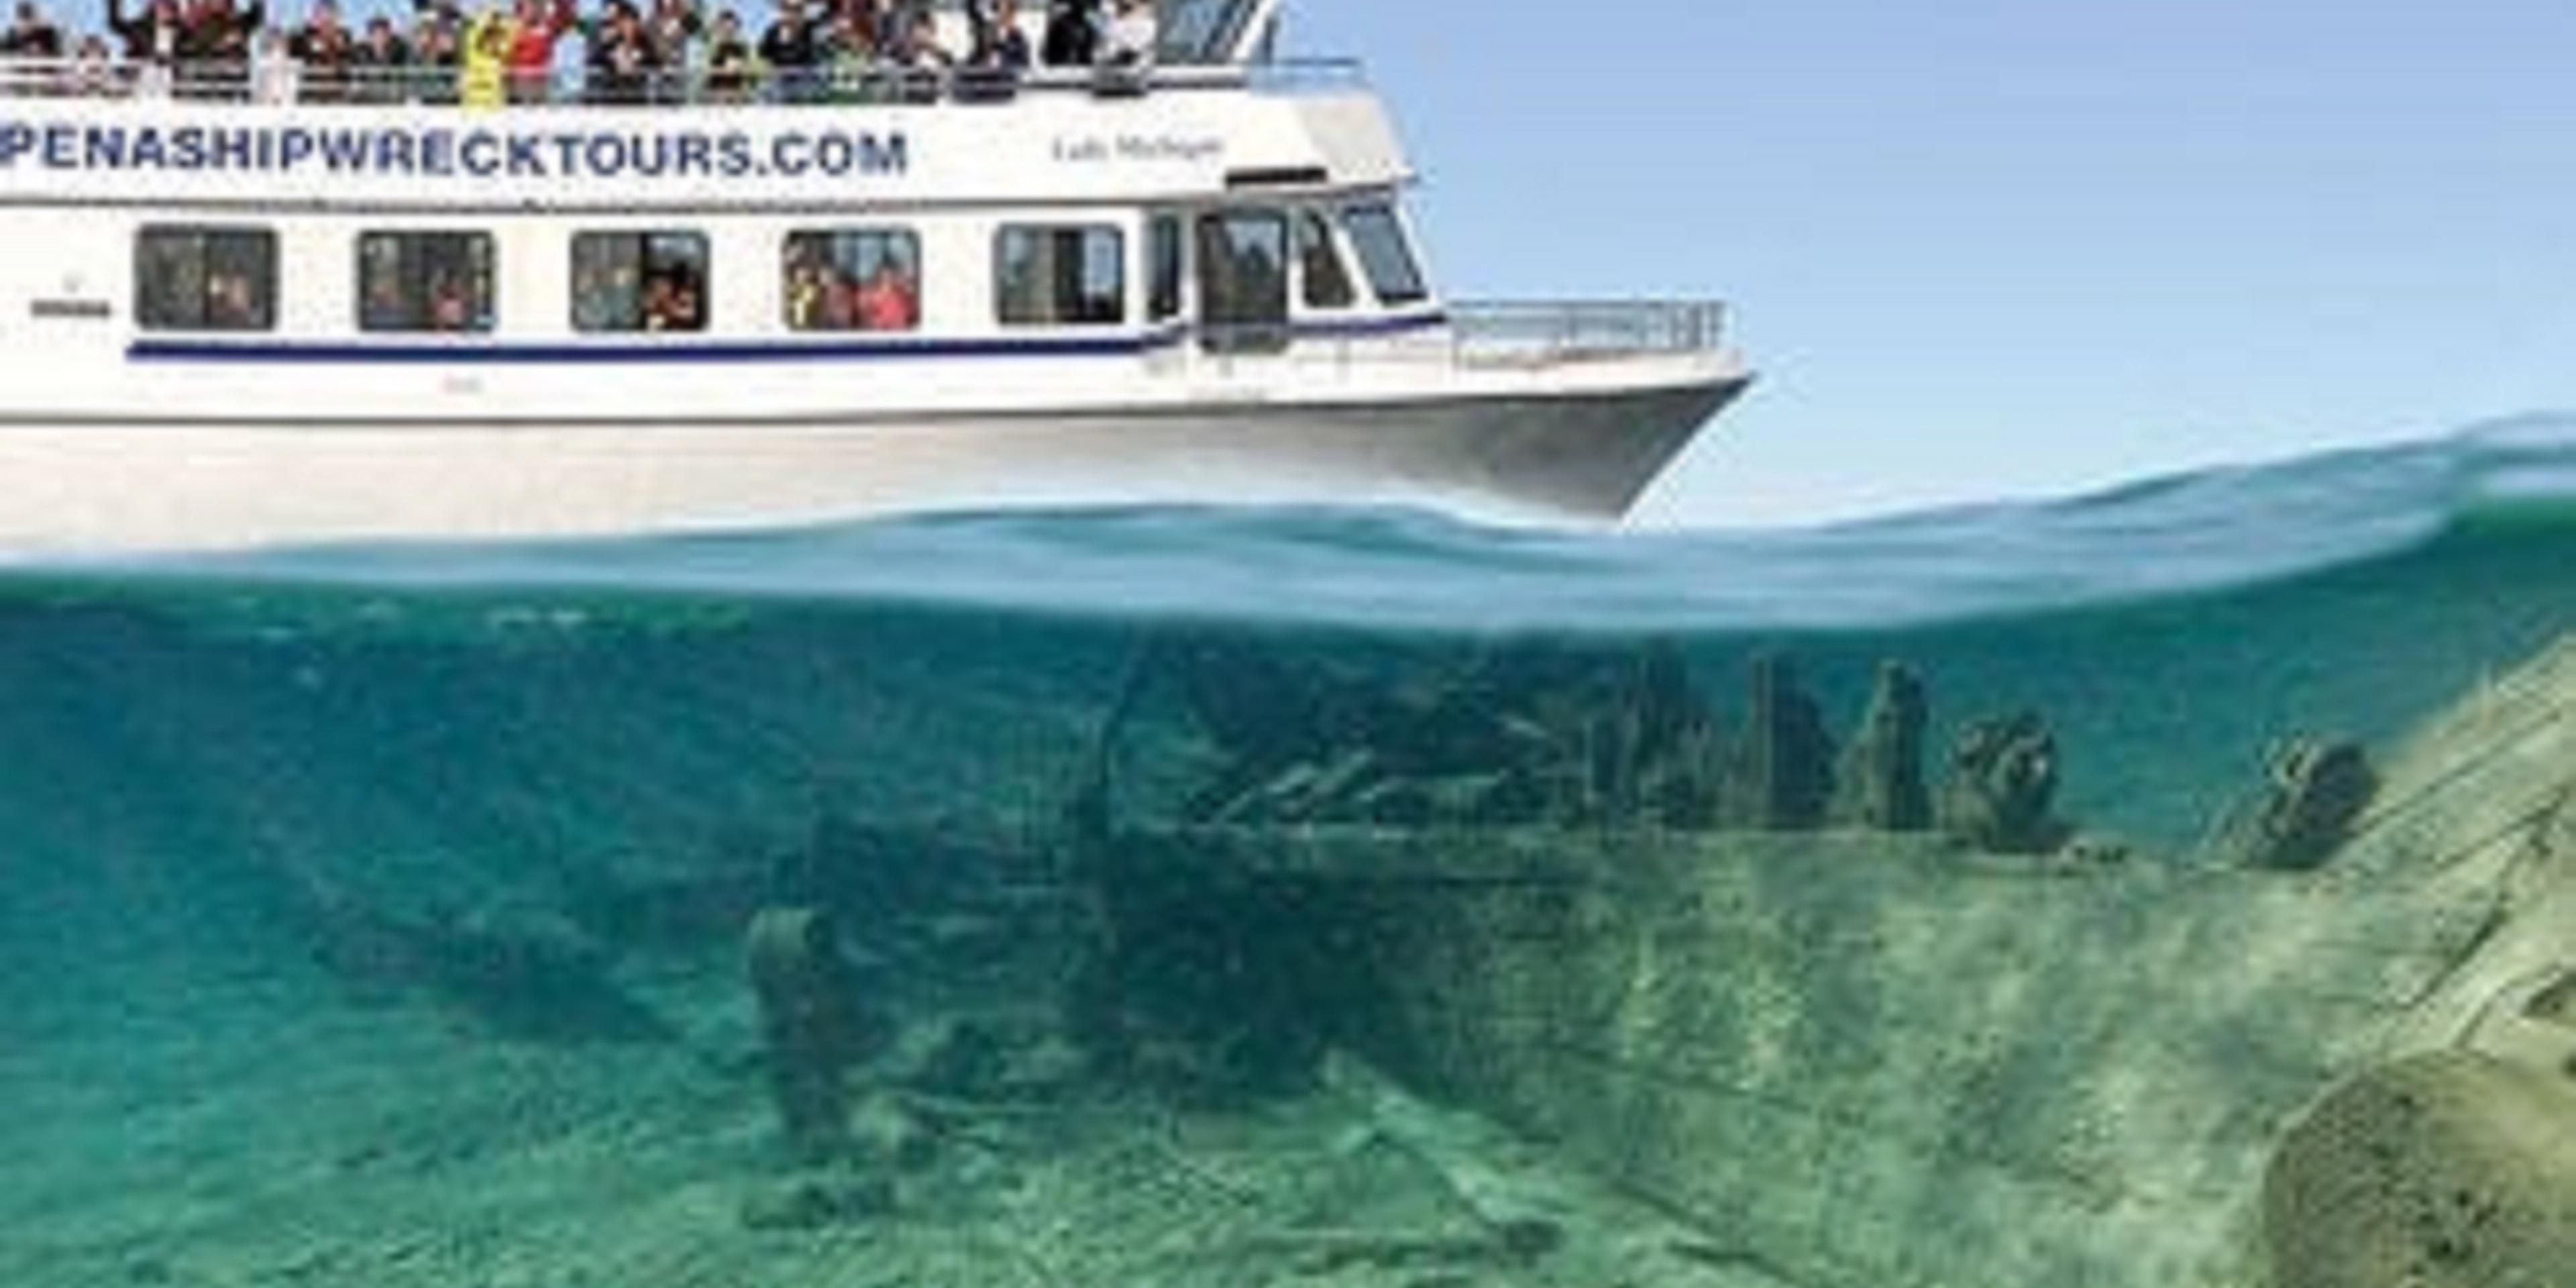 We invite you to come and explore Thunder Bay Marine Sanctuary. This tourist attraction is located within walking distance from our hotel.